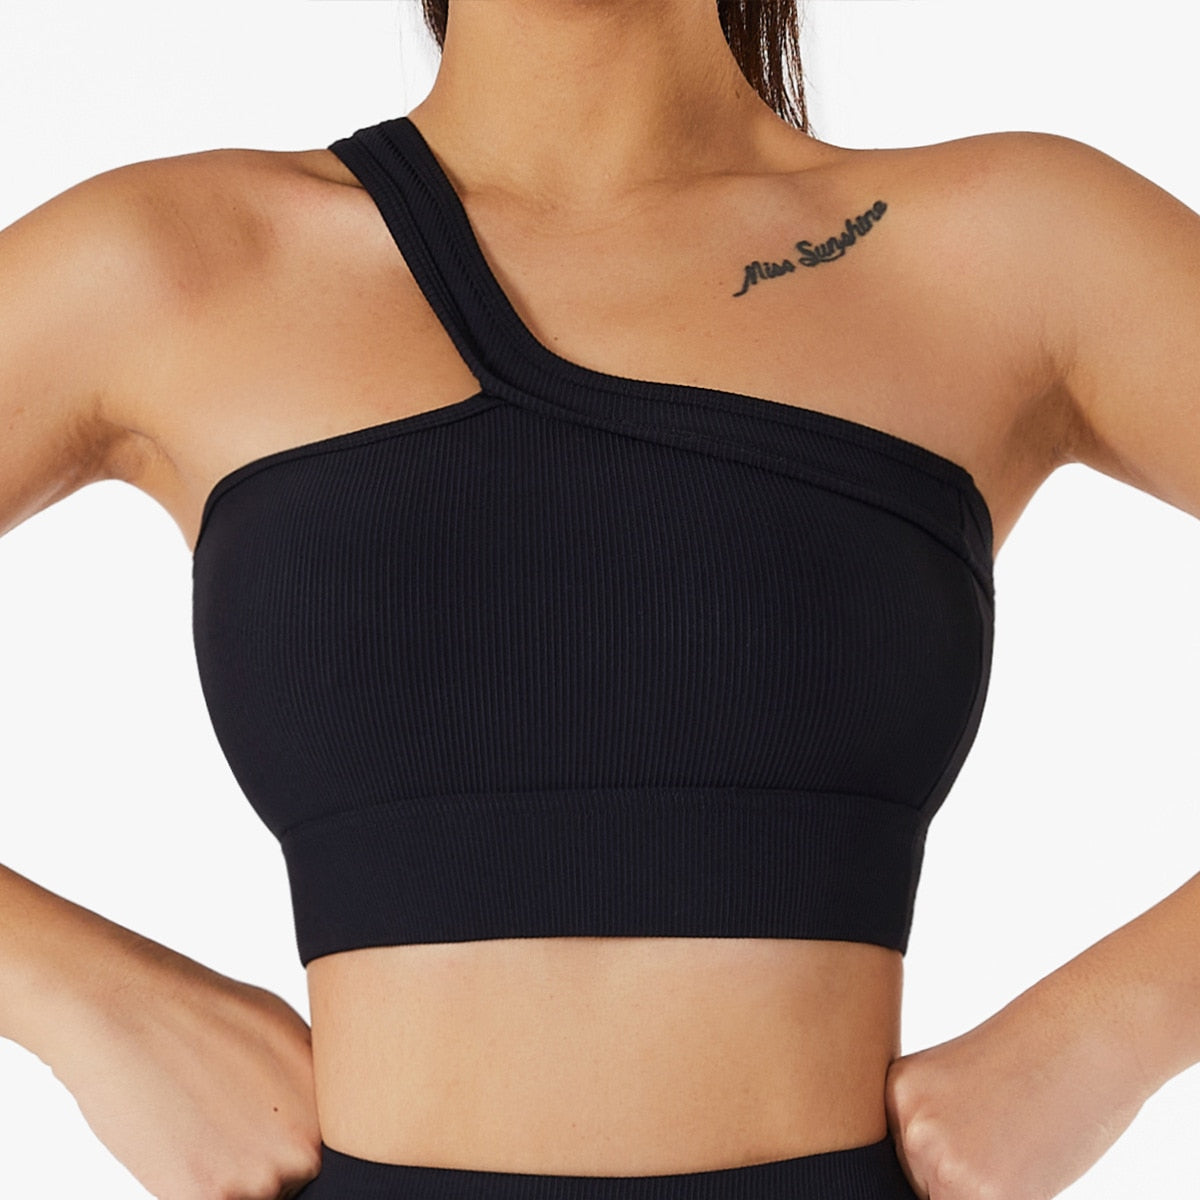 Seamless Thread Fabric Fitness Bra Single Shoulder Strap Gym Top Sports Underwear Outerwear Running Yoga Clothes The Clothing Company Sydney